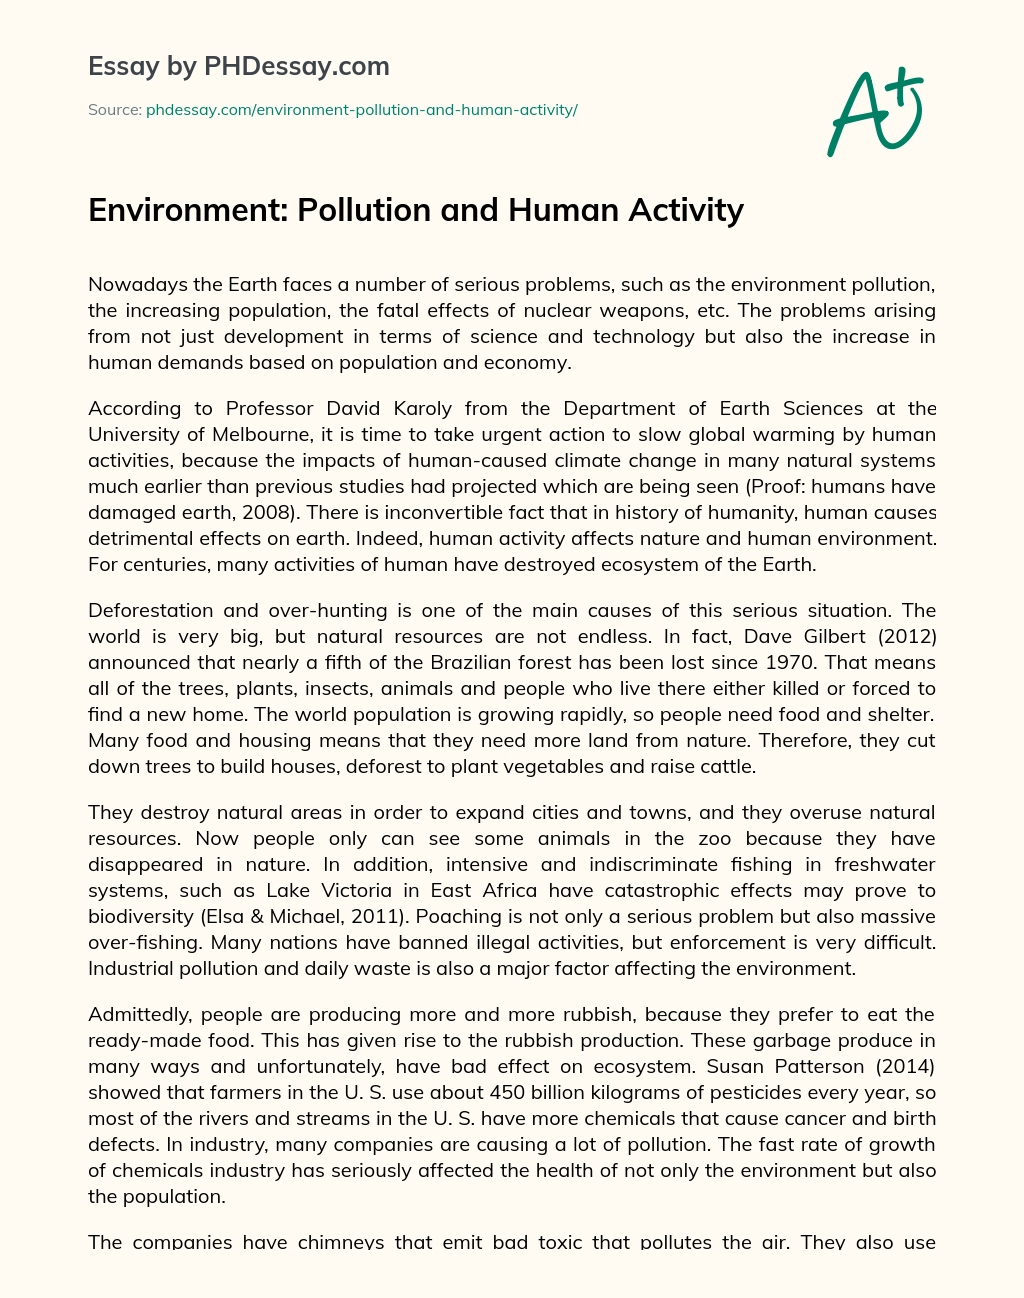 Environment: Pollution and Human Activity essay